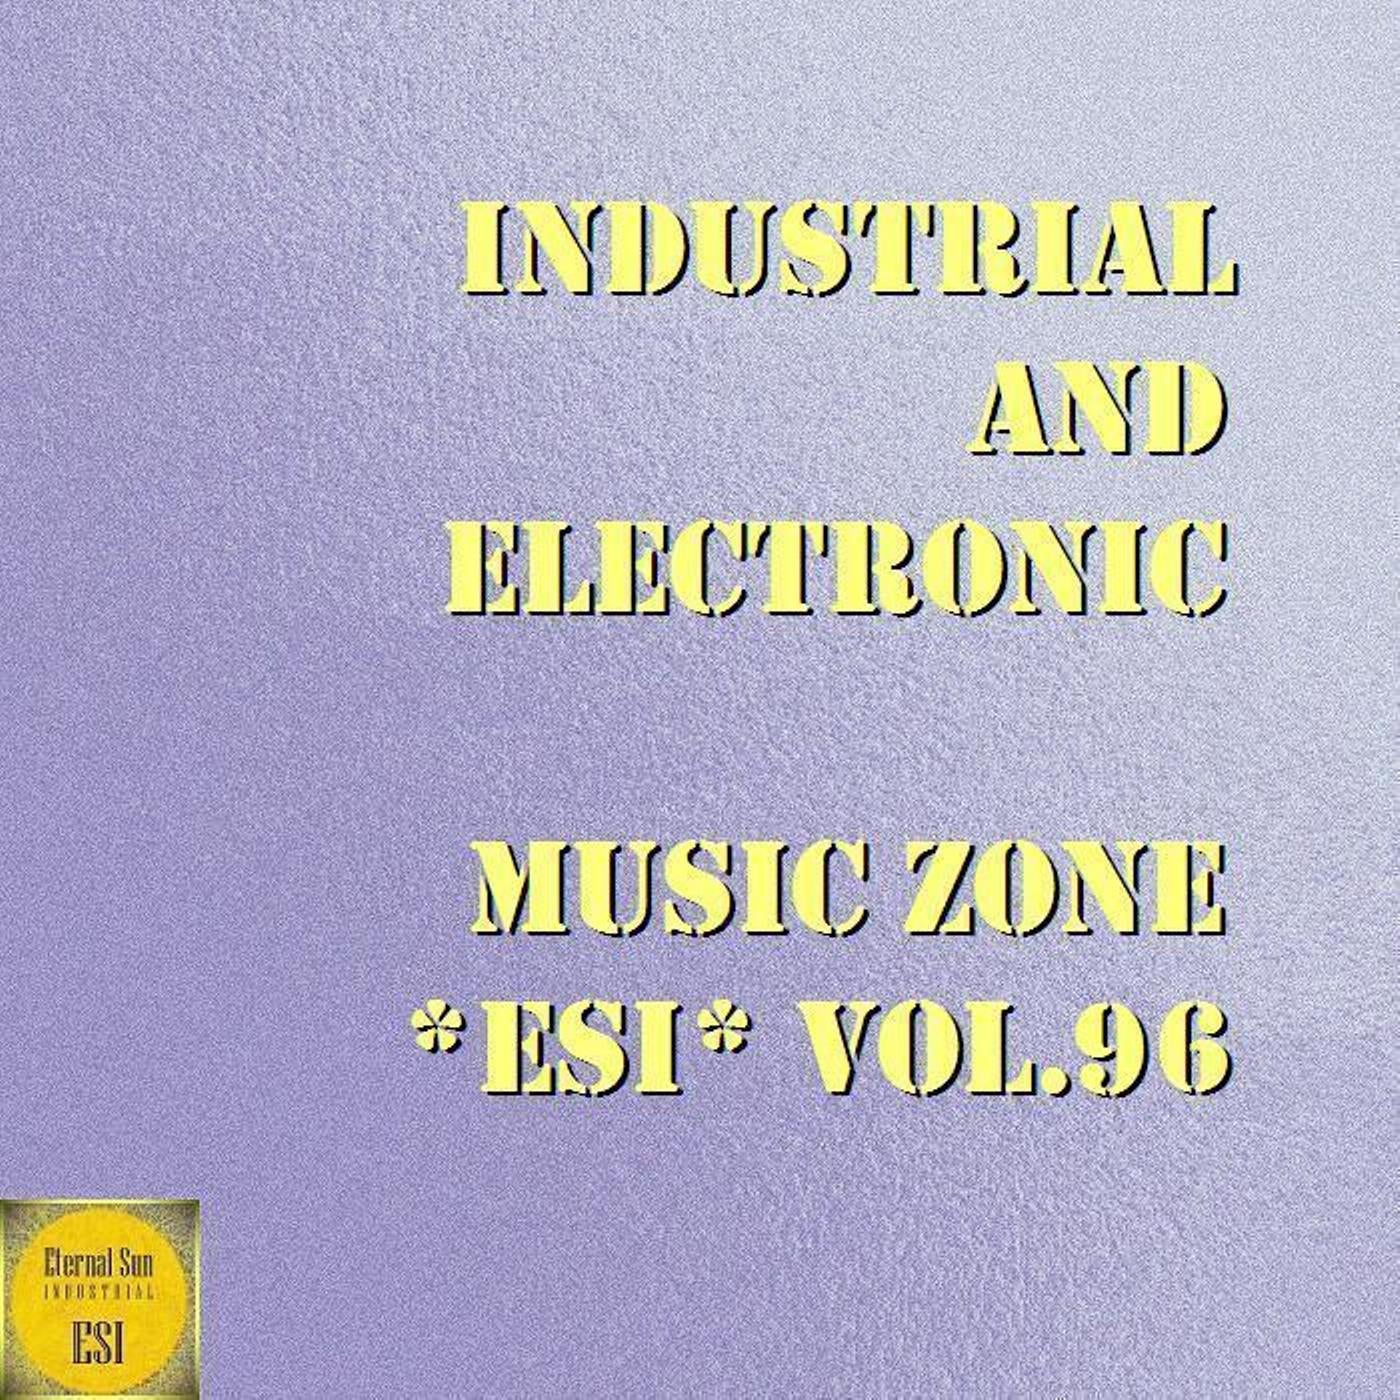 Industrial And Electronic - Music Zone ESI Vol. 96